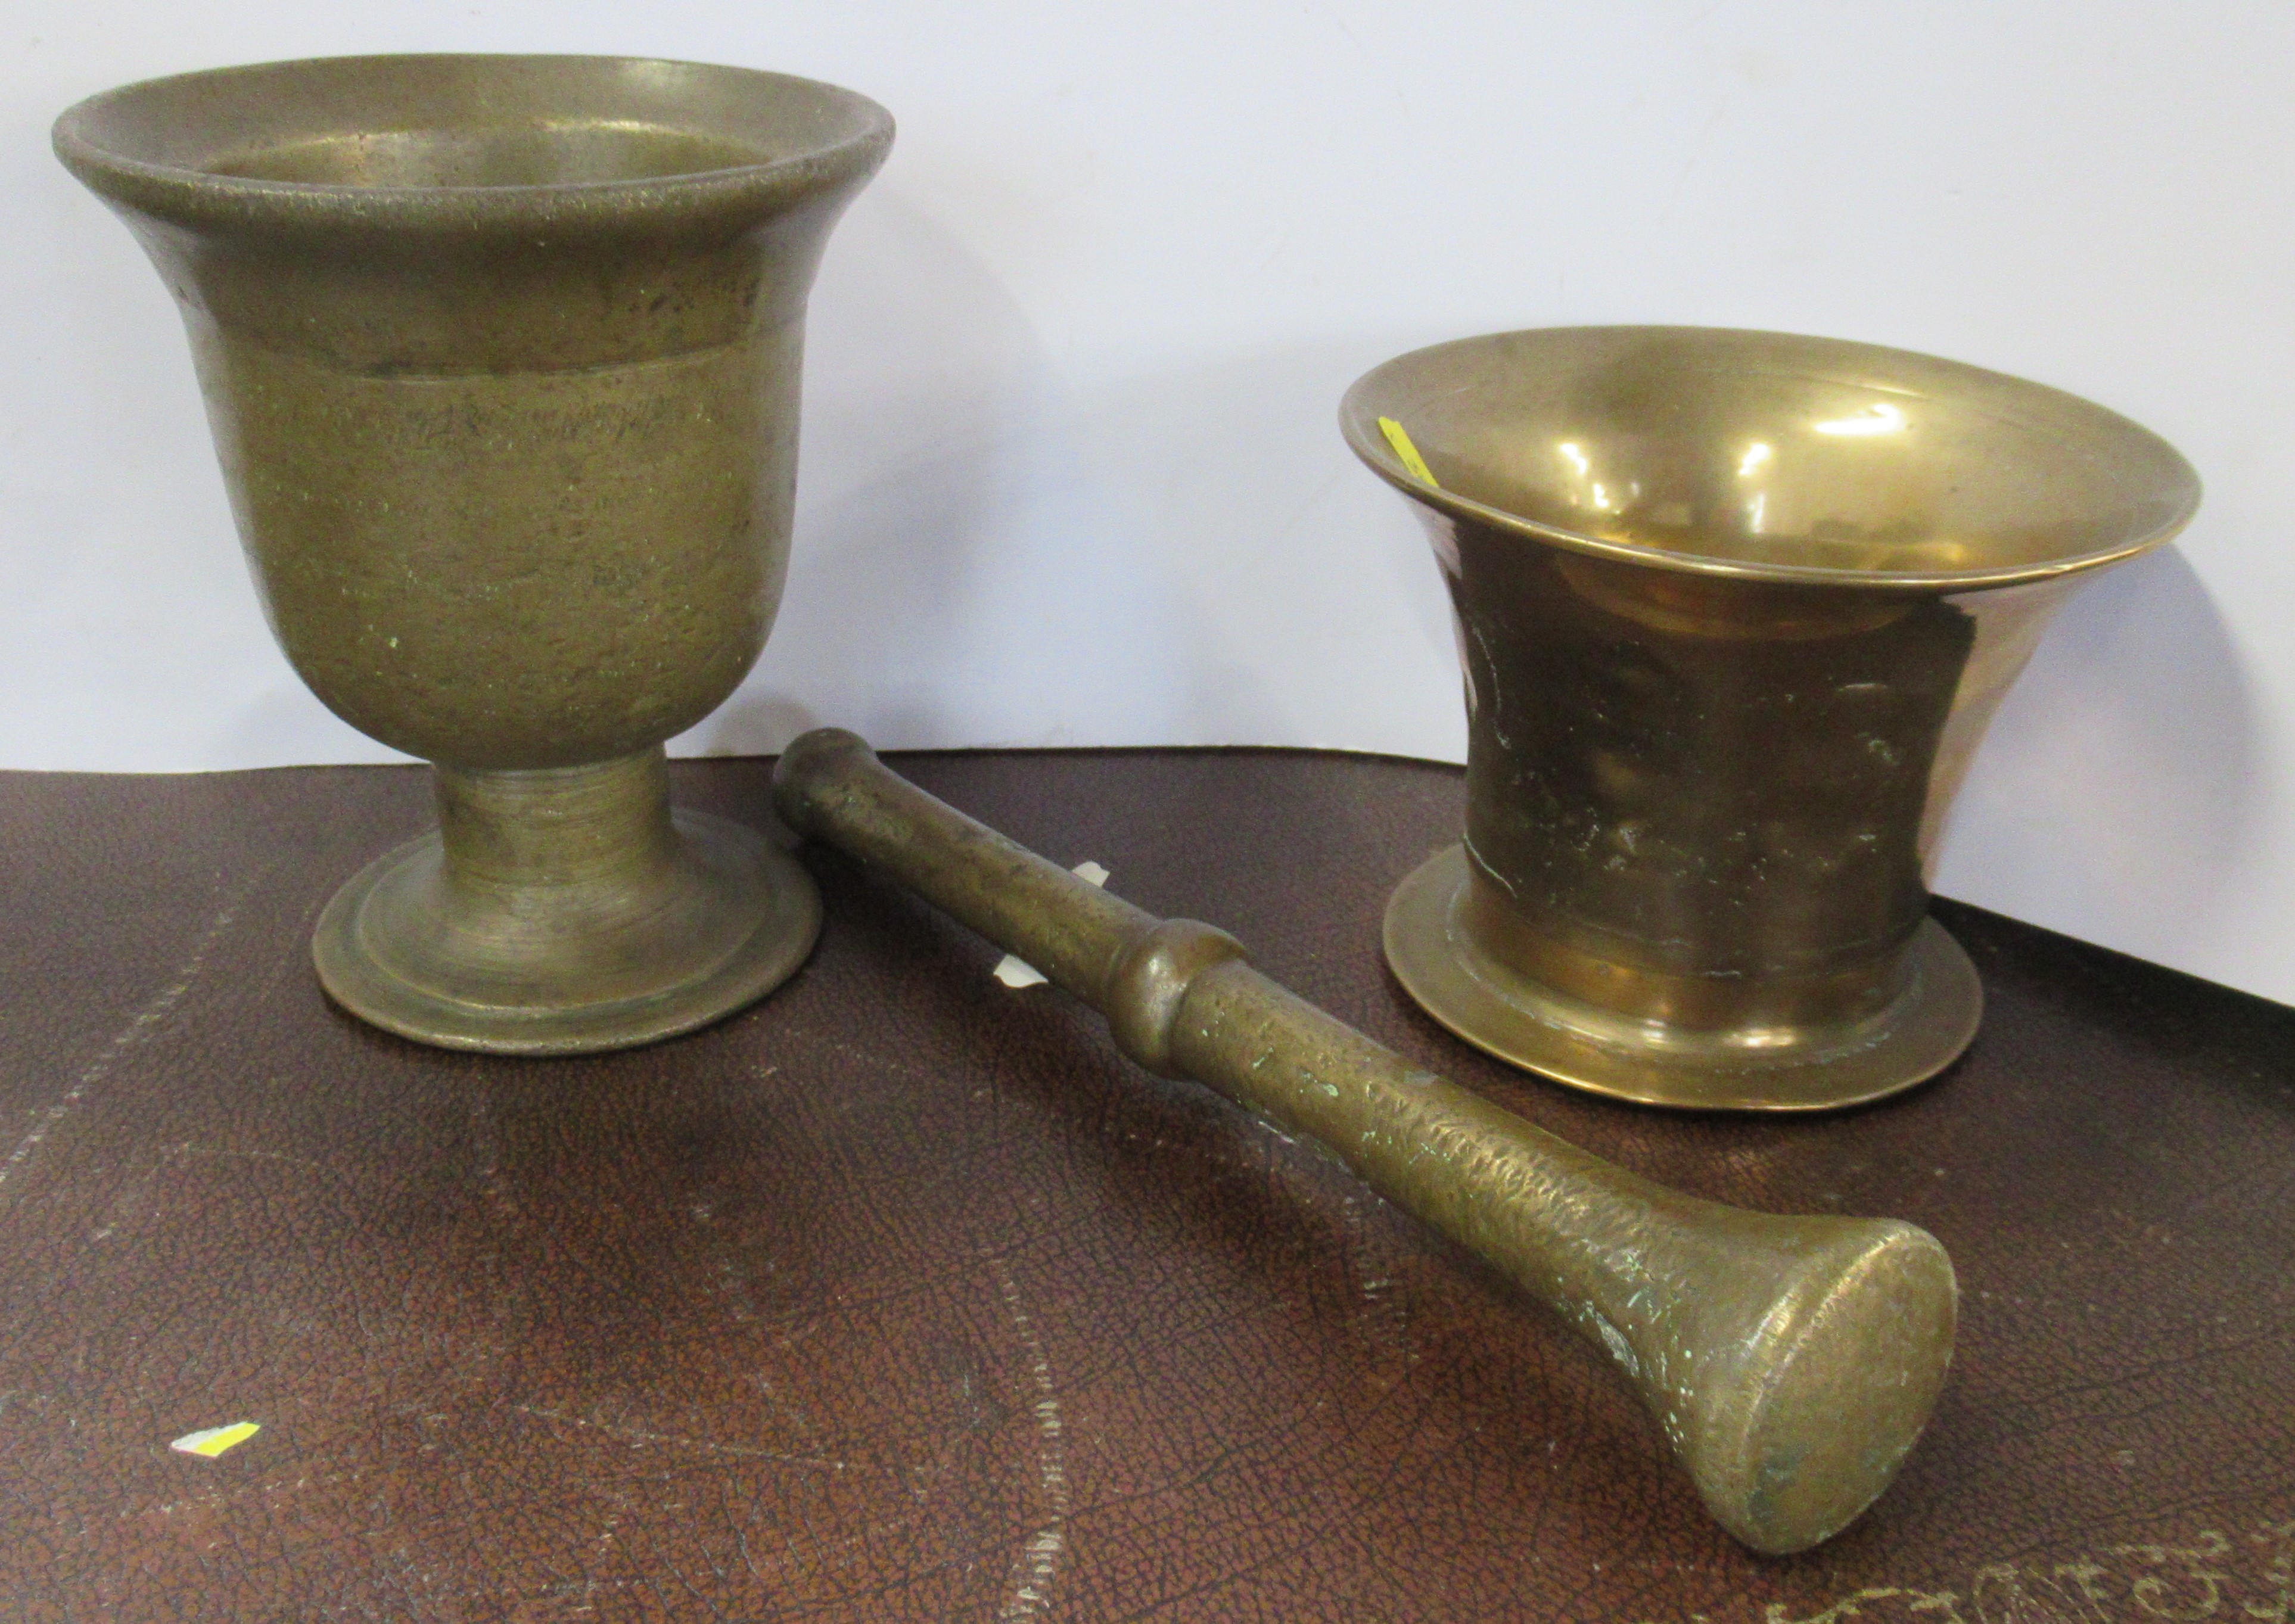 Two brass mortars and a pestle